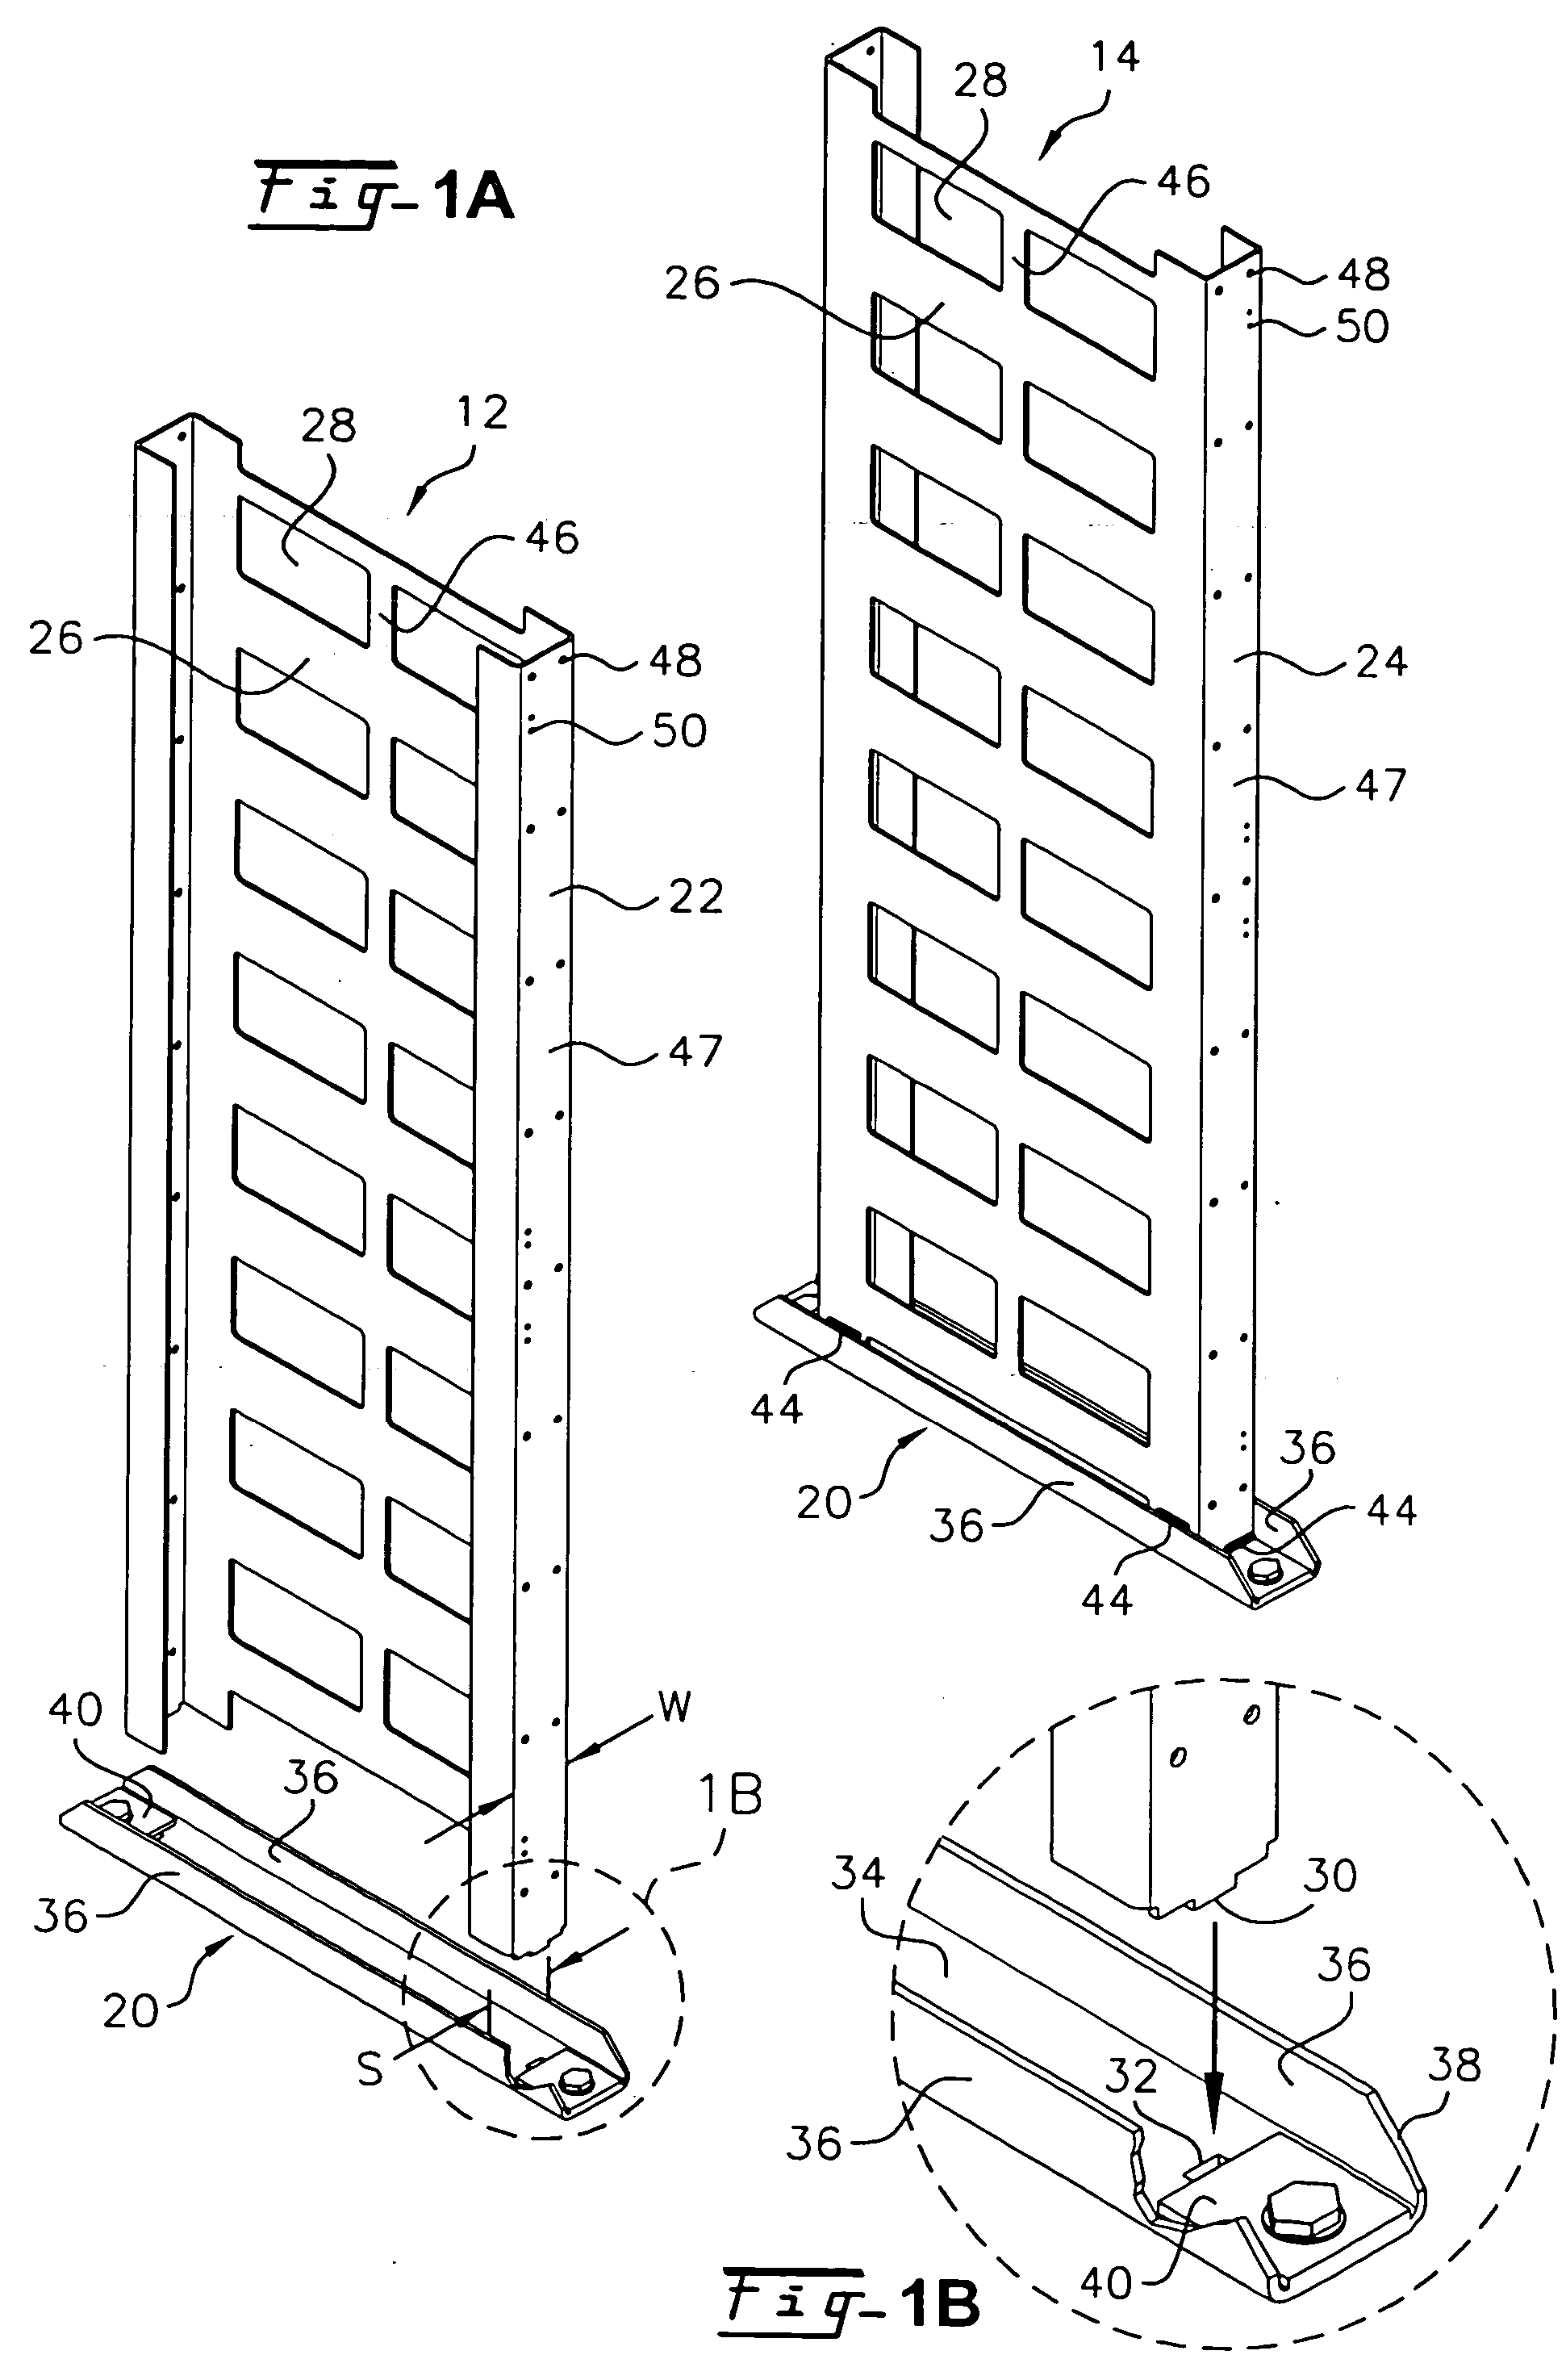 Battery rack and system